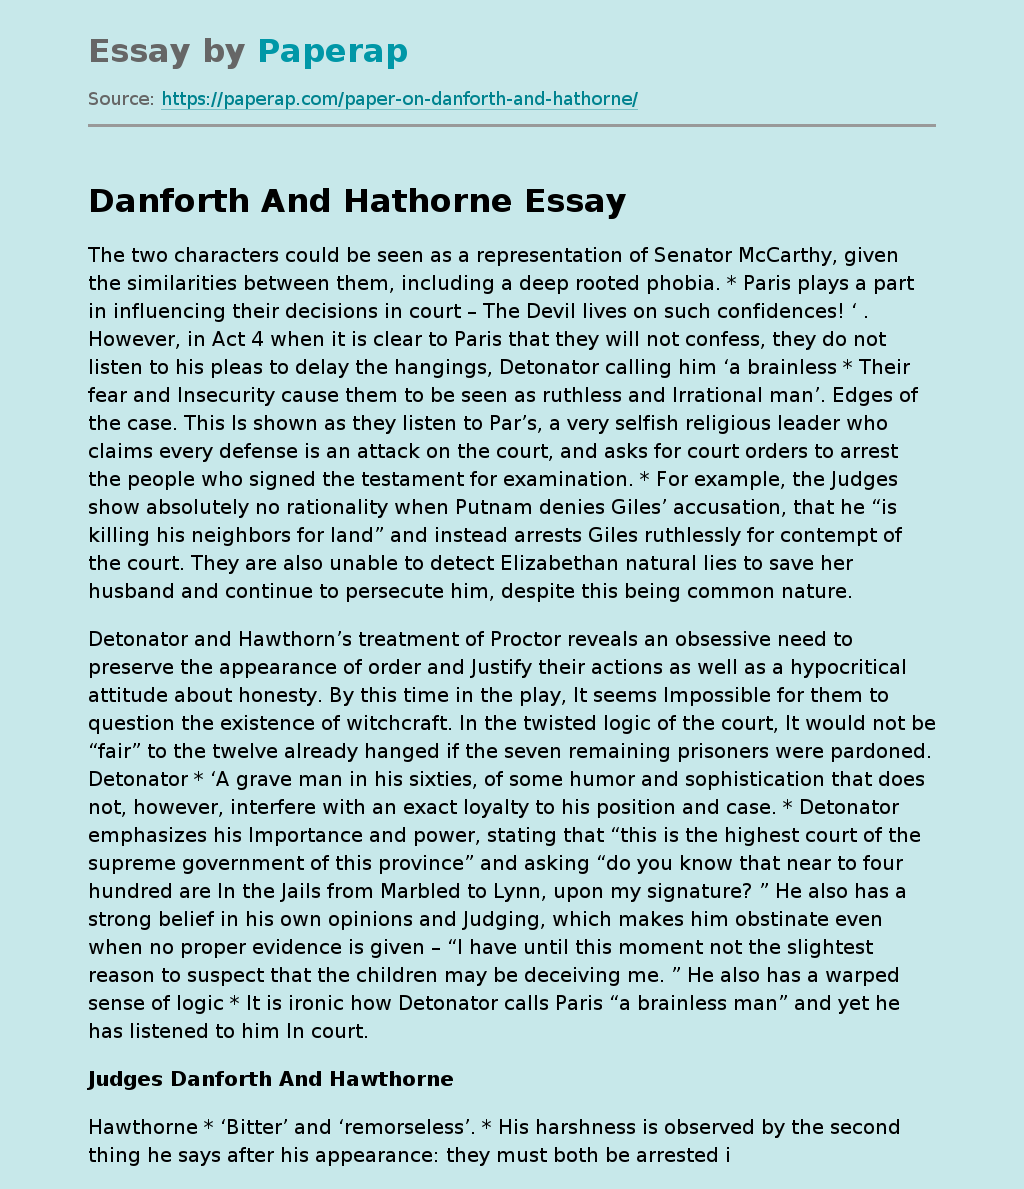 Characteristics of the Characters Danforth and Hawthorne